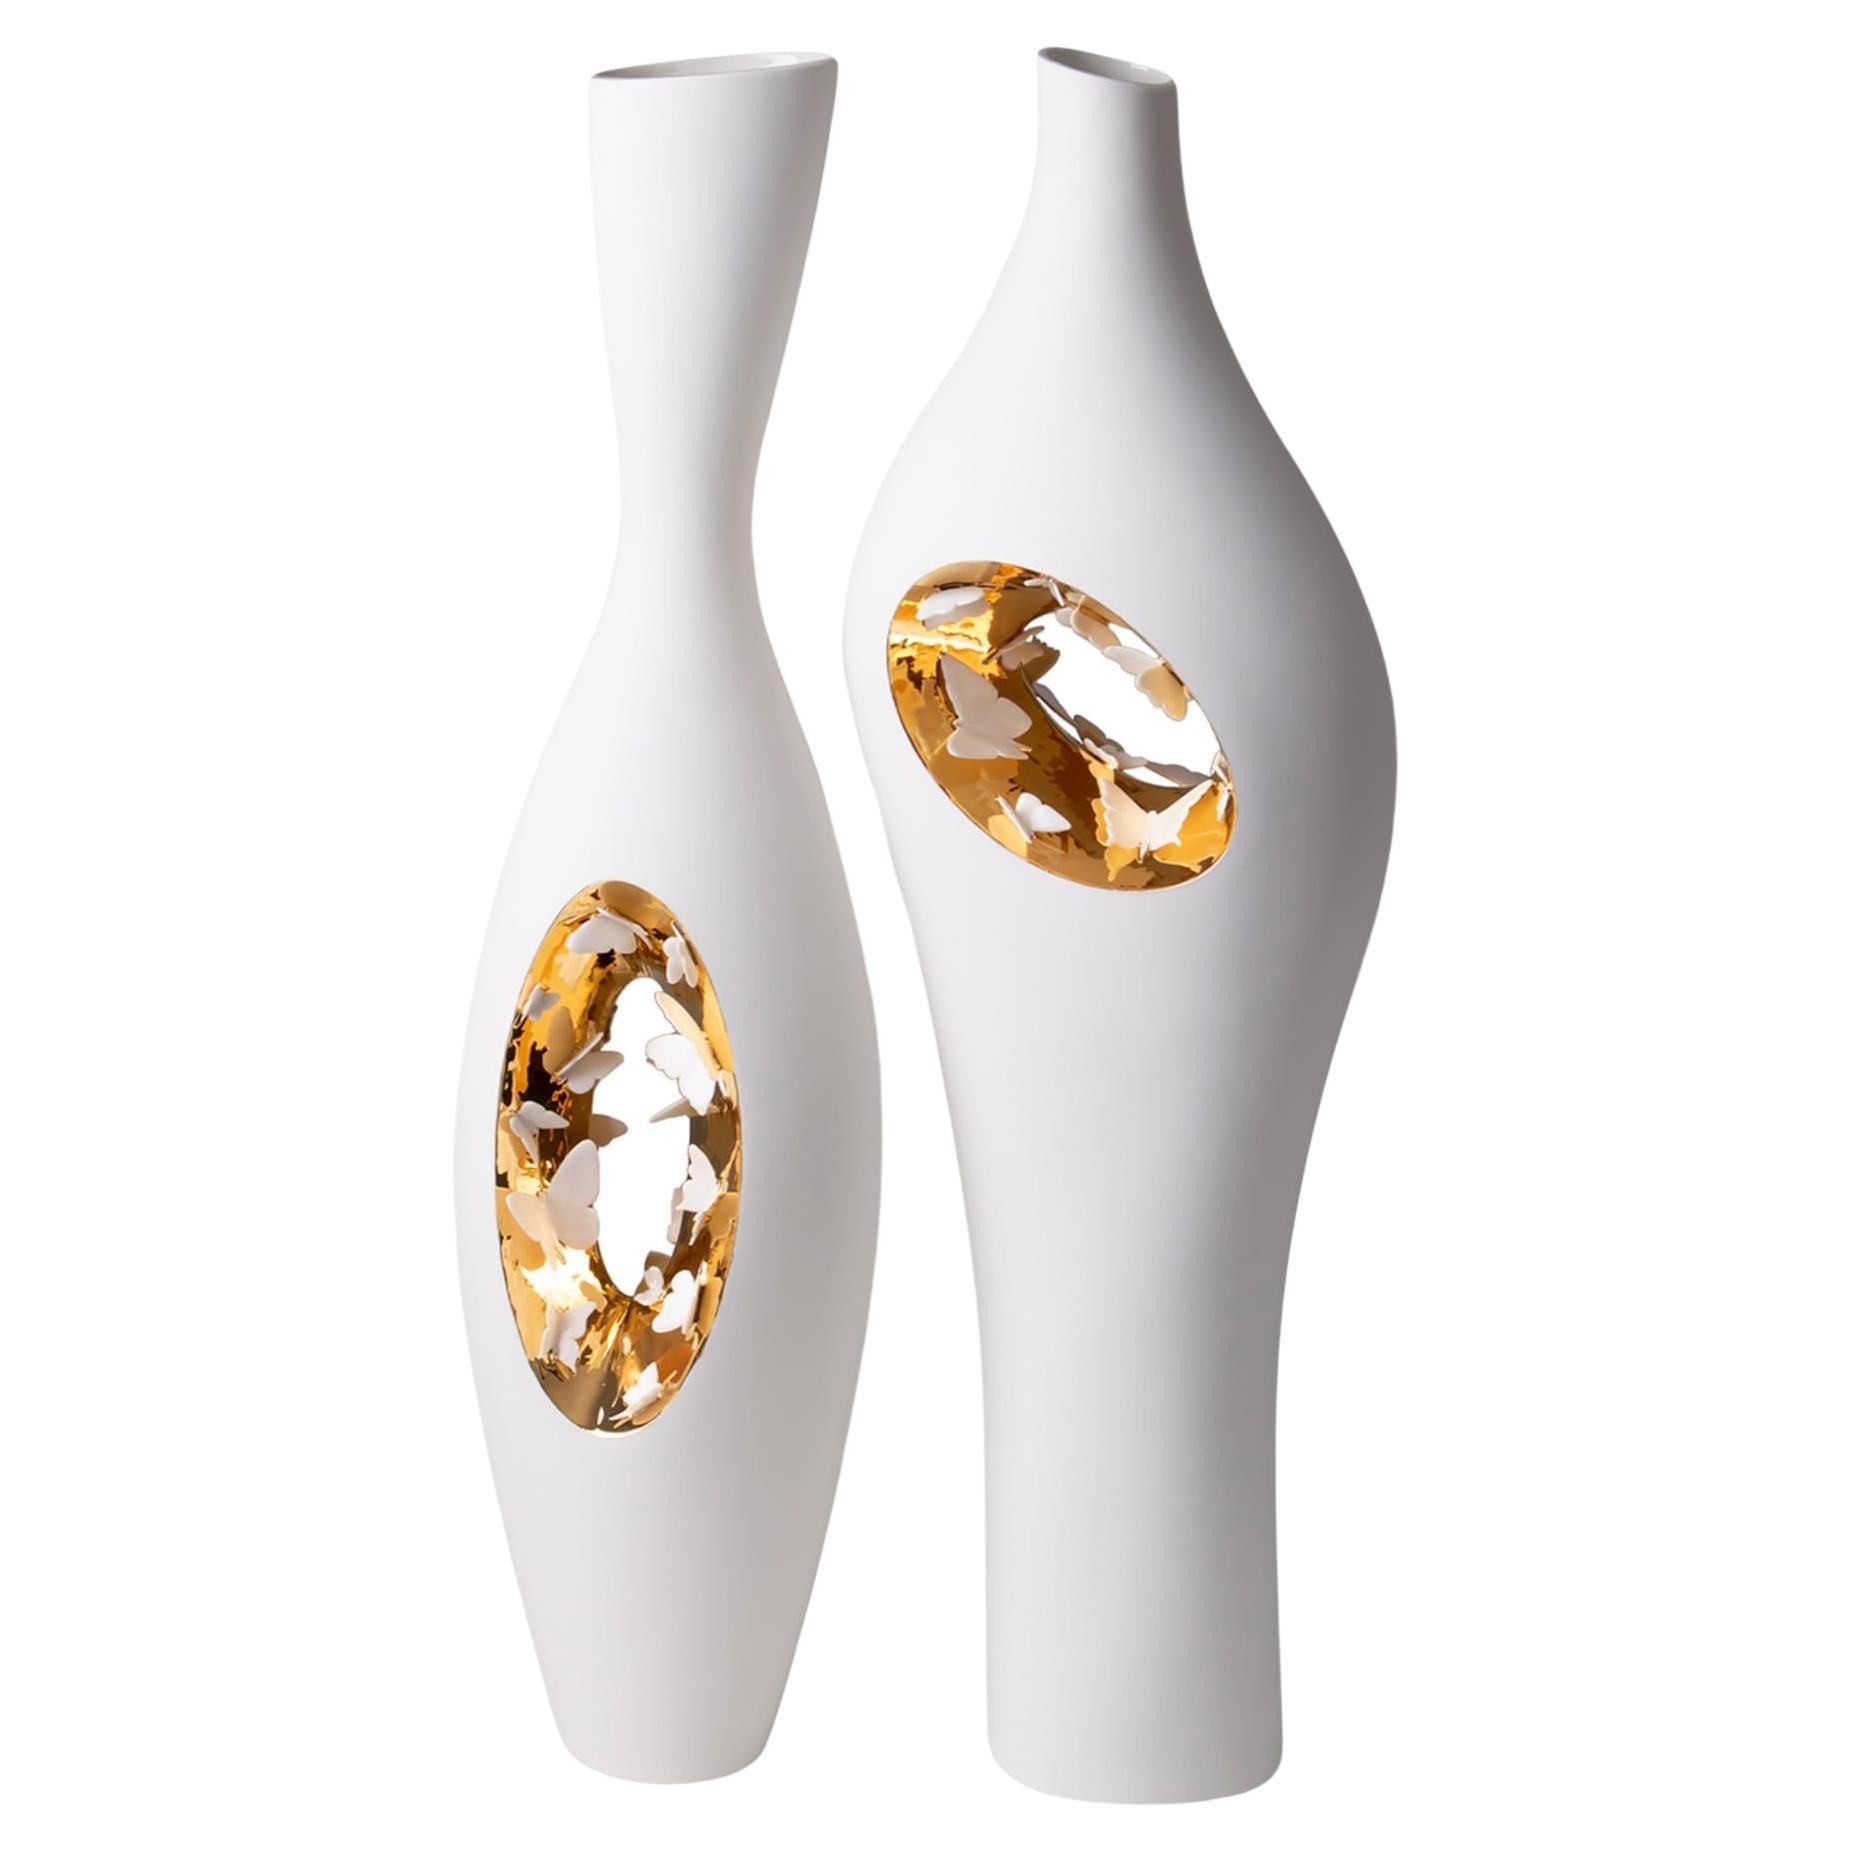 Falling in Love Gold Couple Vases For Sale